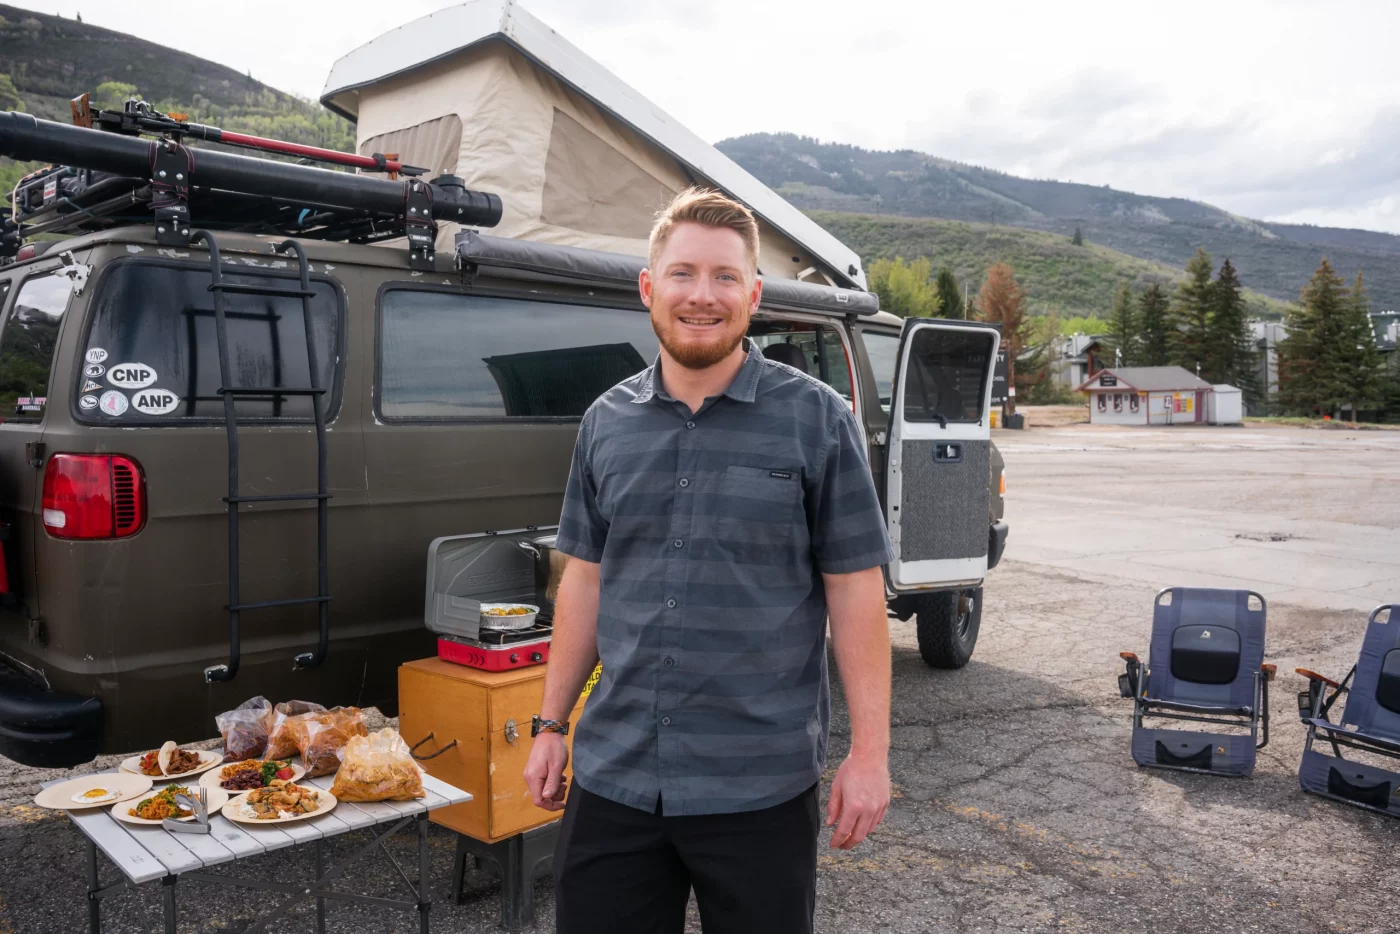 John Fitzgerald stands in front of his truck, next to a table of cooked food.